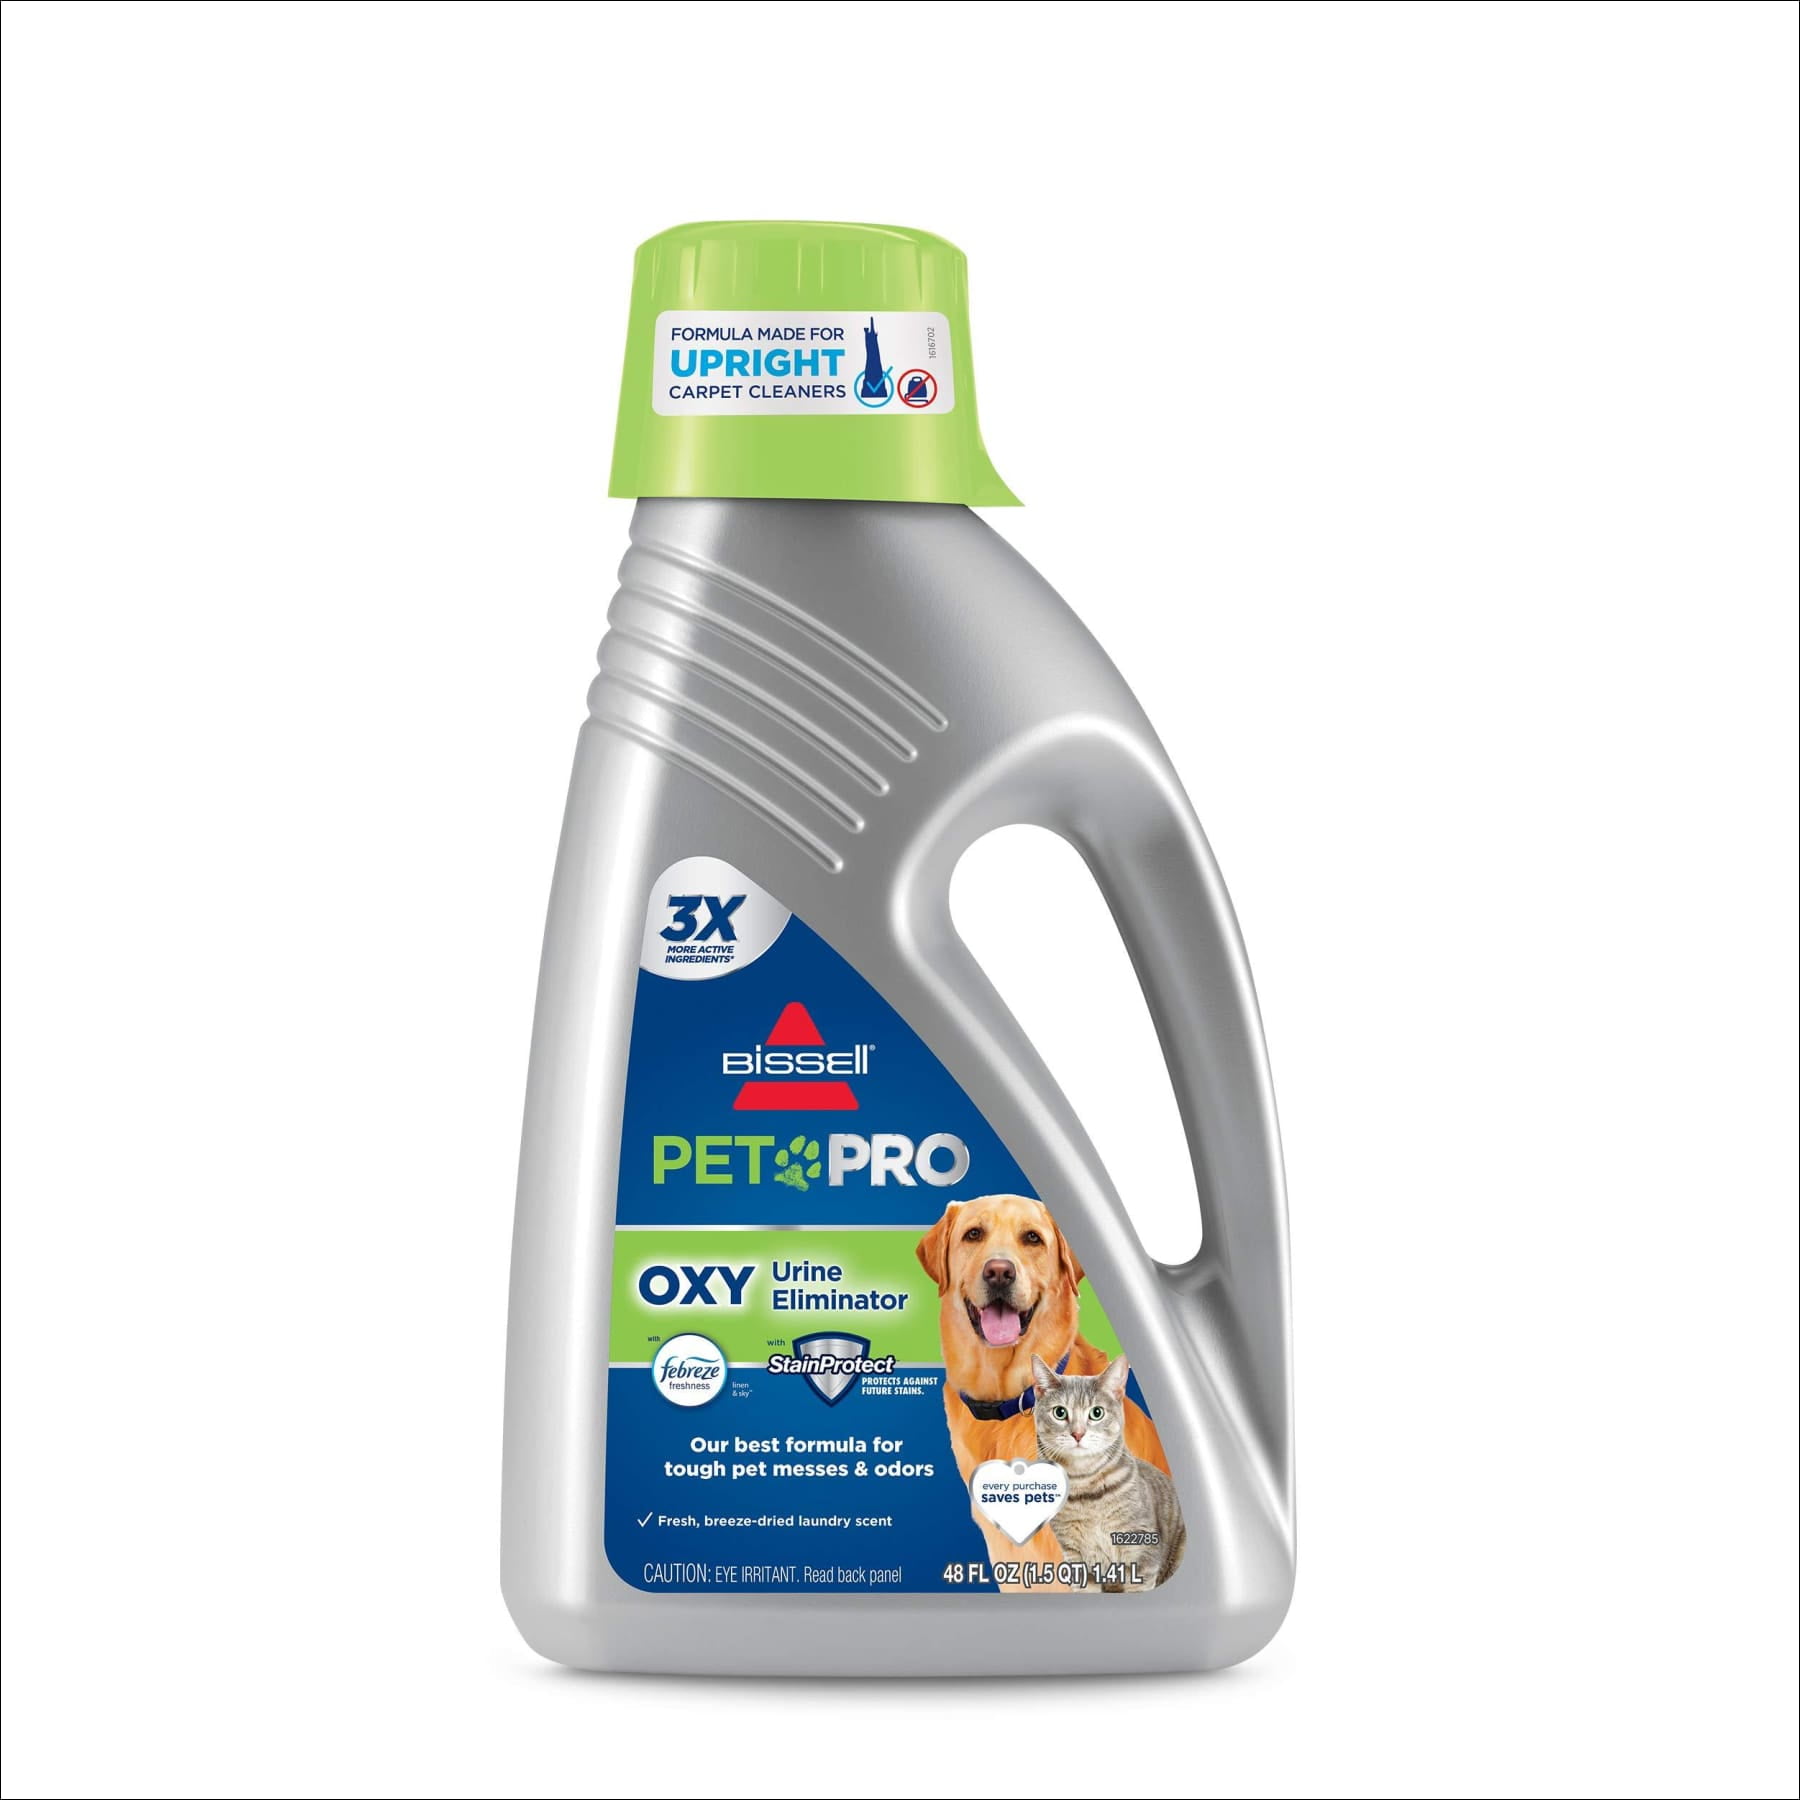 Zep Premium Pet Carpet Shampoo - 1 Gallon (Case of 4) ZUPPC128 -  Concentrated Pro Formula Removes Tough Pet Stains and Odors